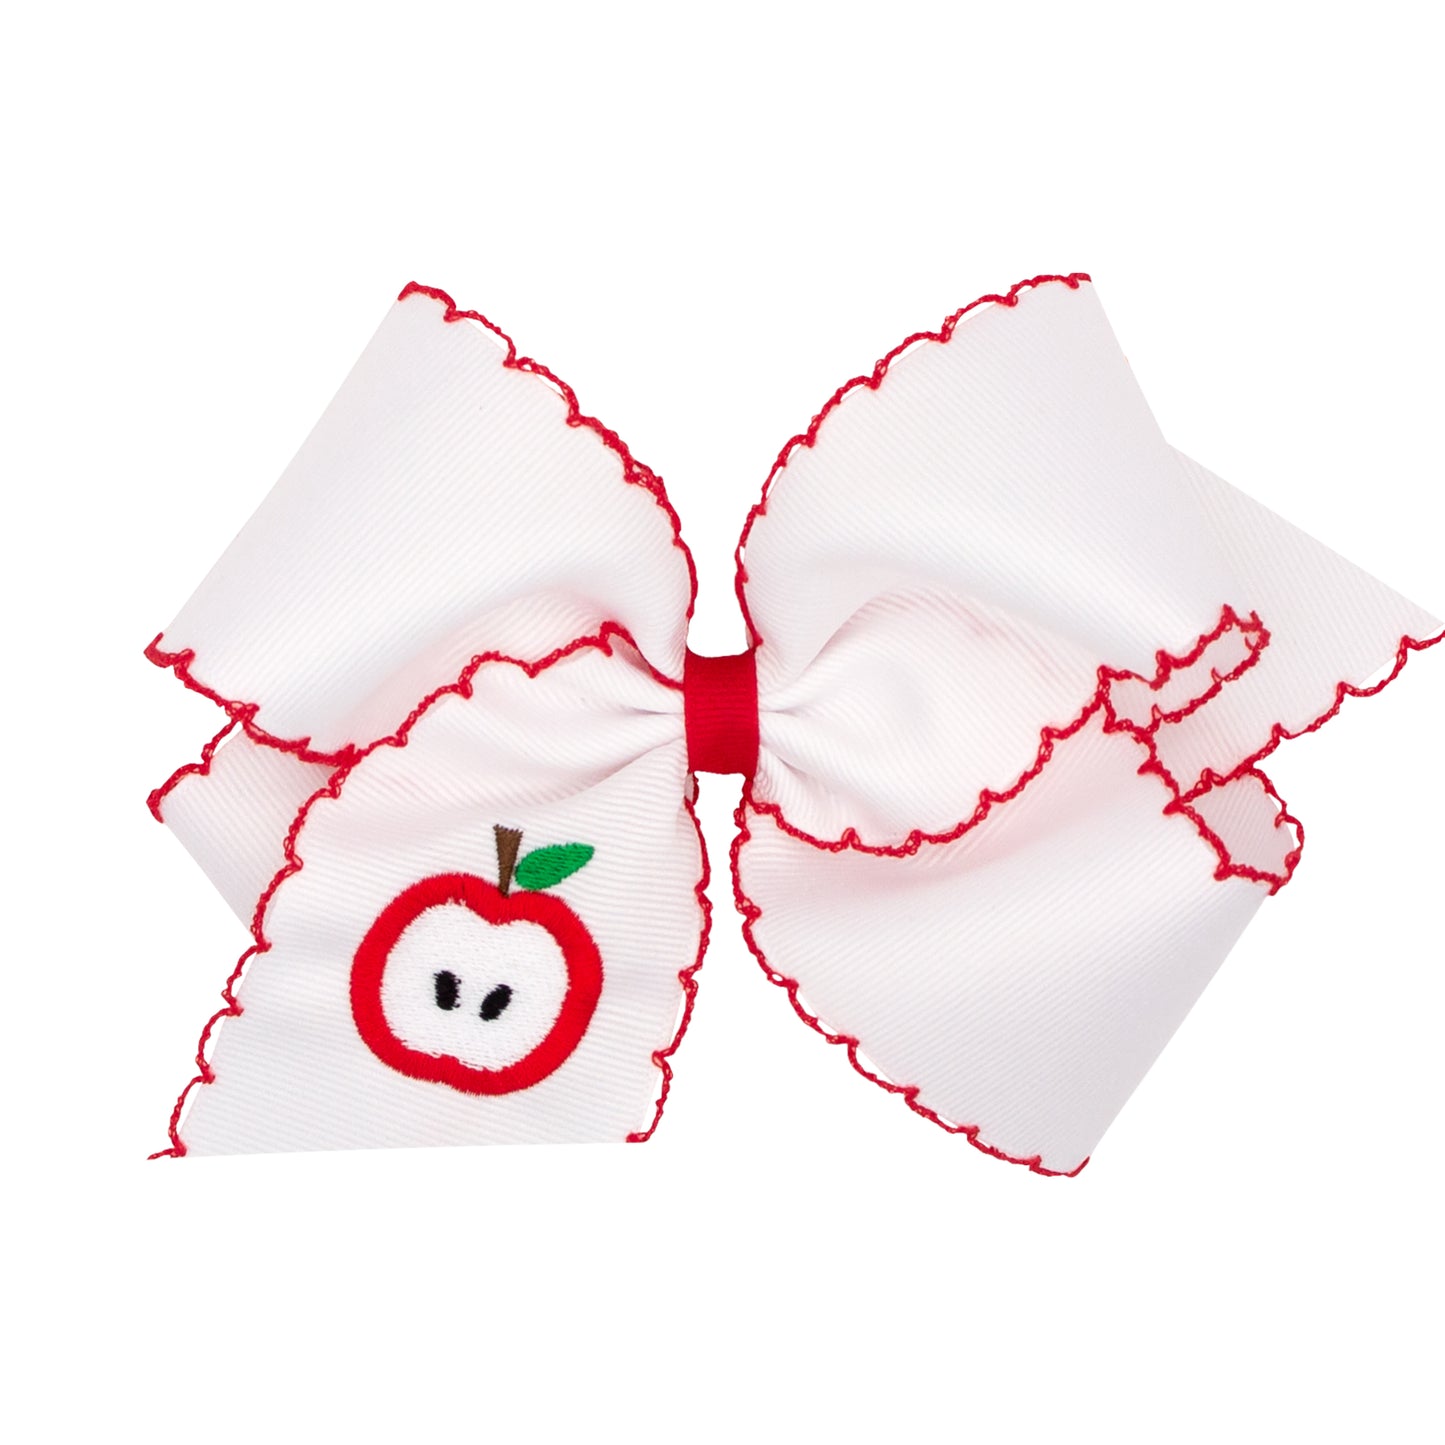 King Apple Embroidered Grosgrain Hair Bow with Moonstitch Edge - White